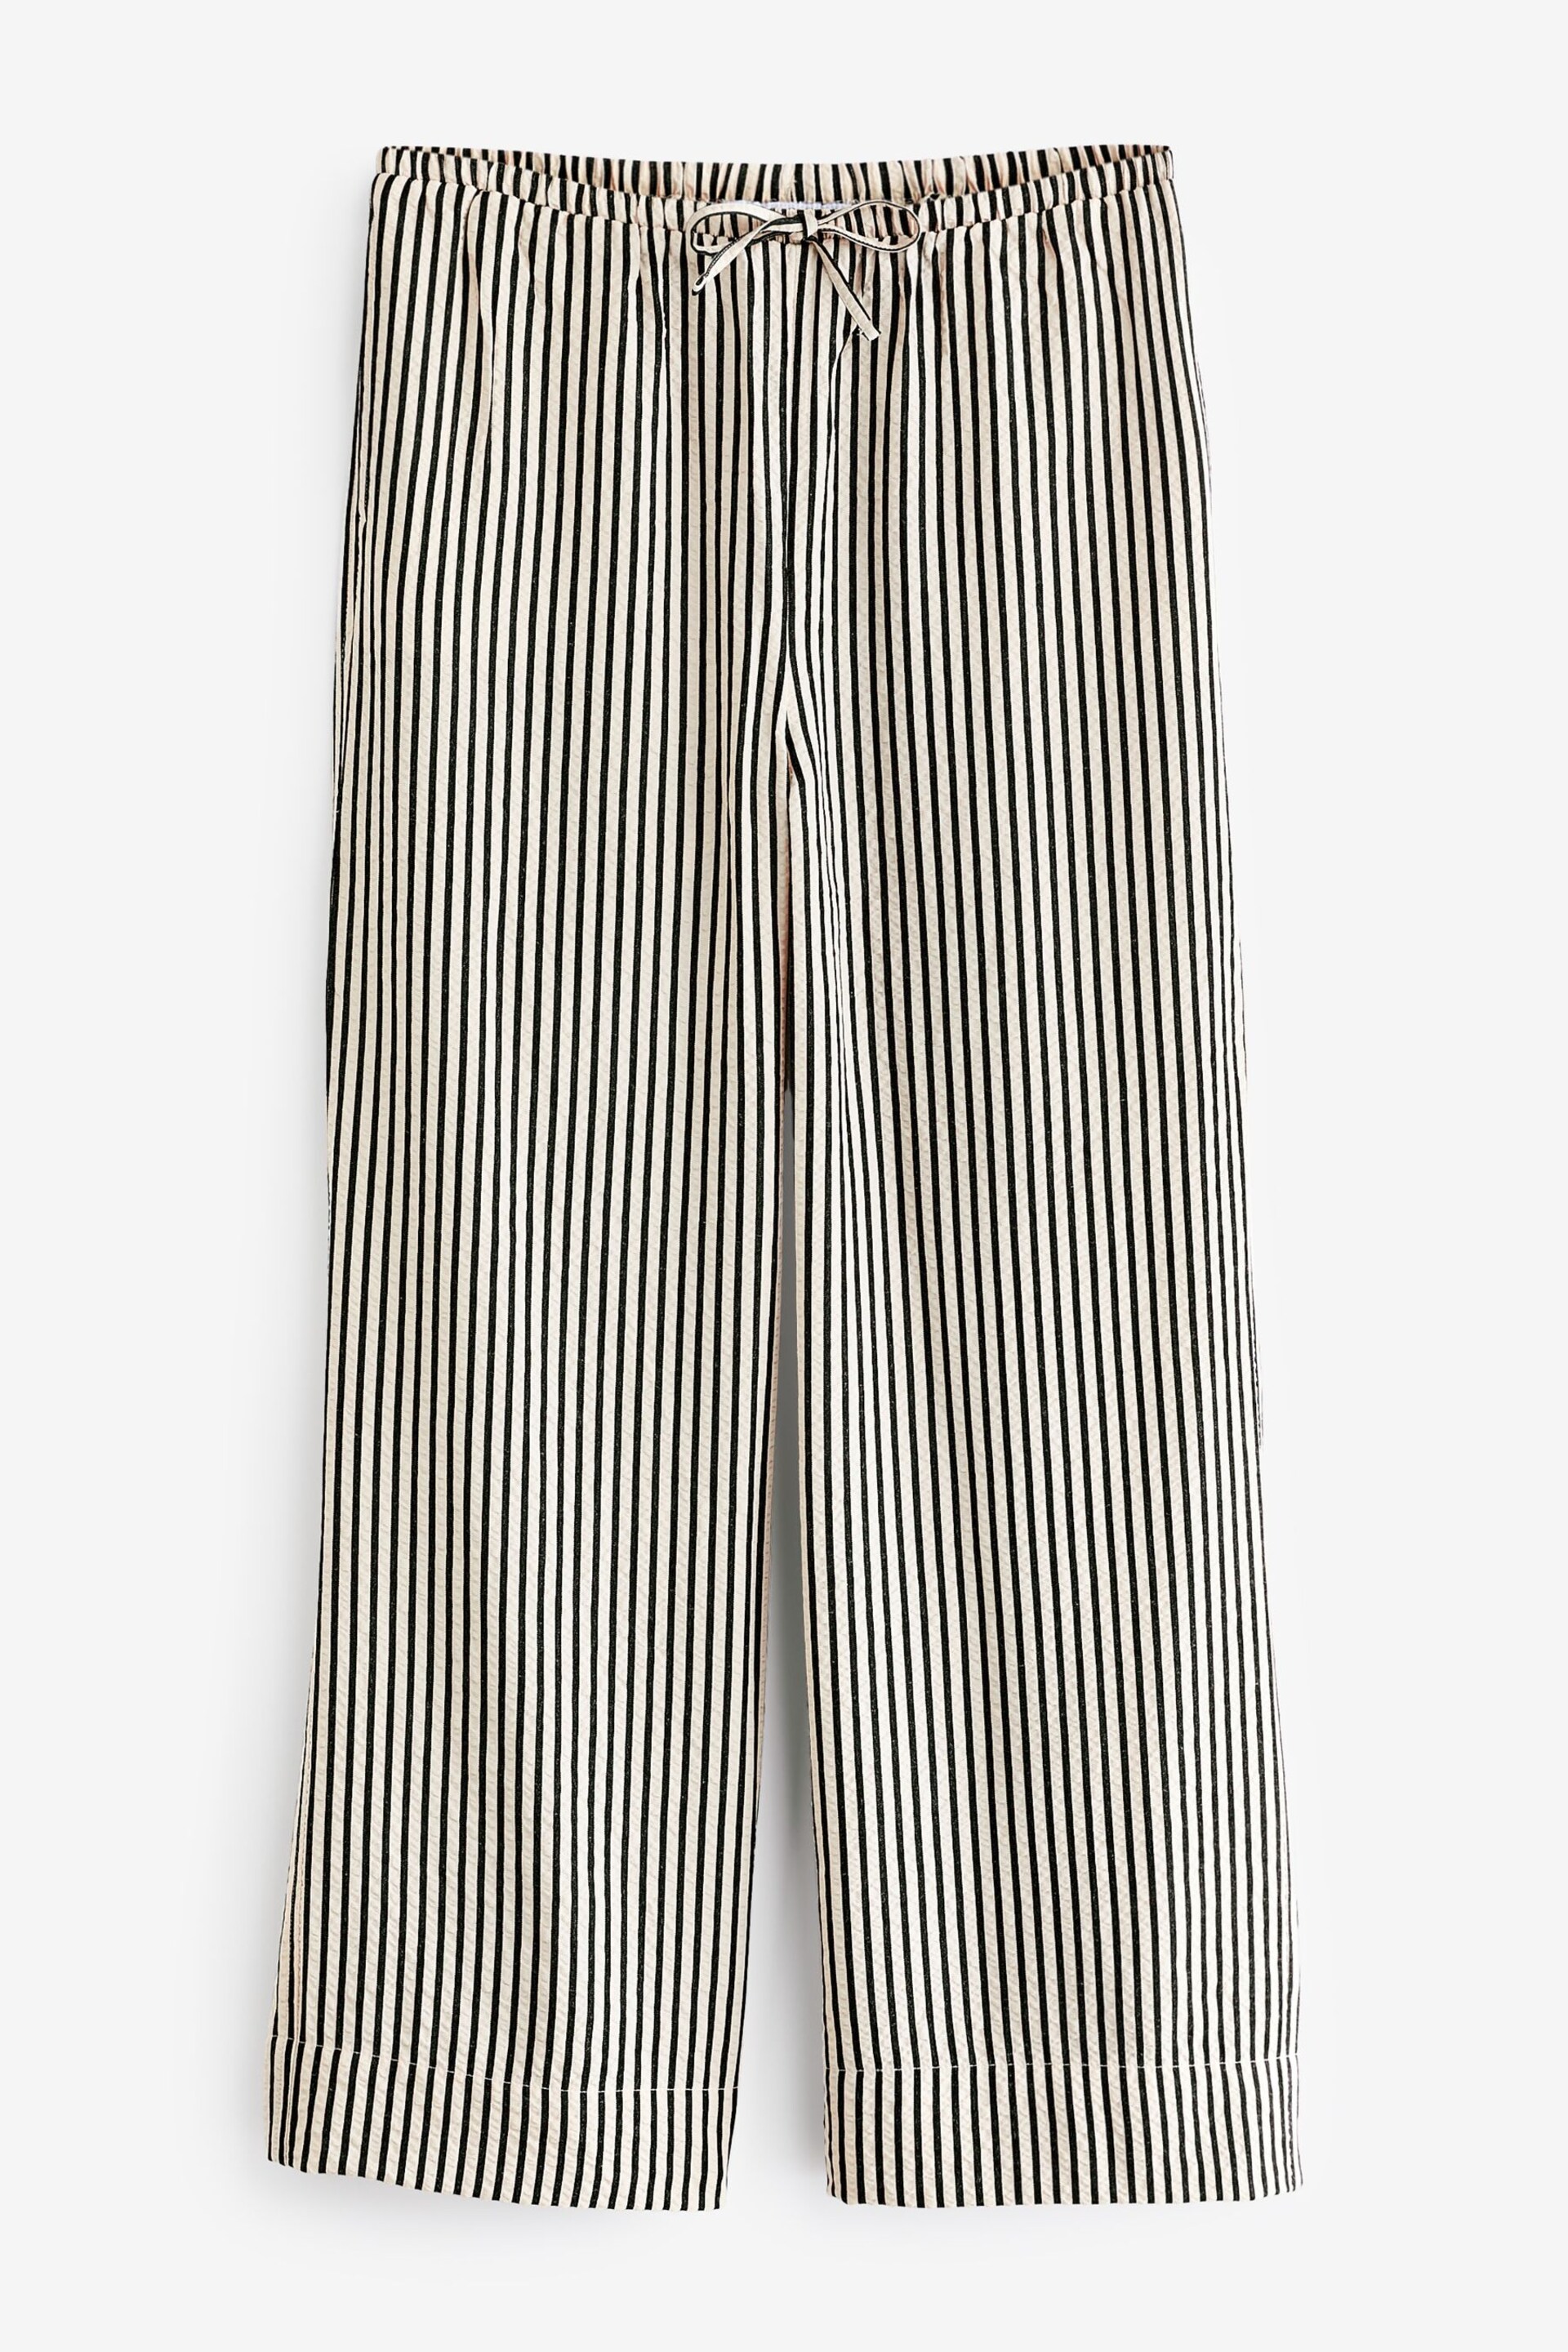 Black and White Textured Stripe Wide Leg Trousers - Image 5 of 6